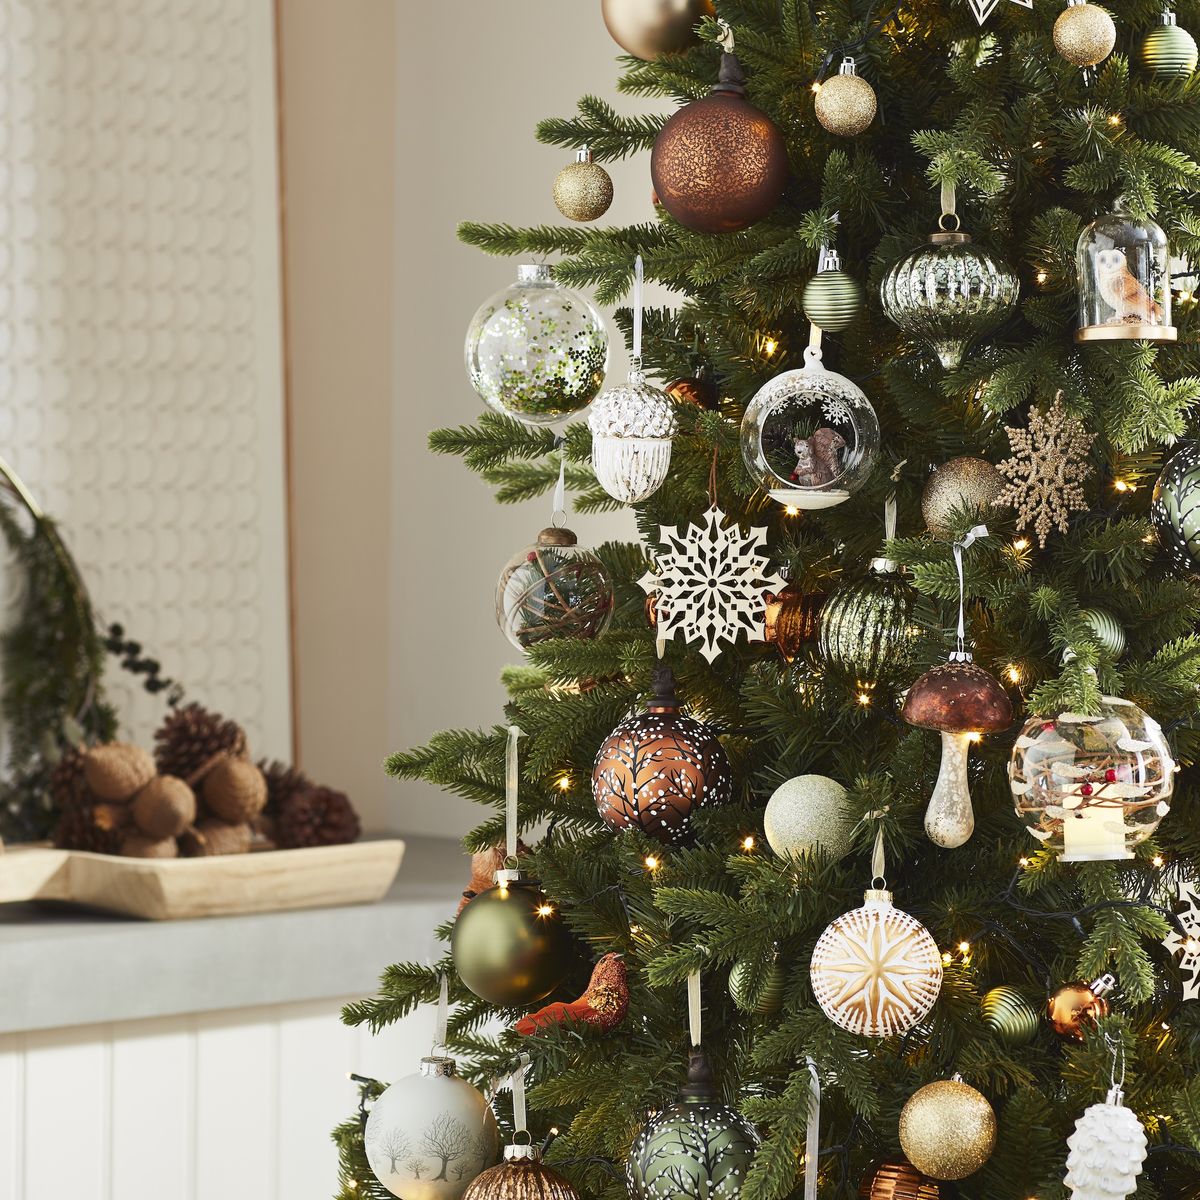 https://hips.hearstapps.com/hmg-prod/images/homebase-refined-nature-christmas-tree-trend-1666261882.jpg?crop=0.707xw:1xh;center,top&resize=1200:*